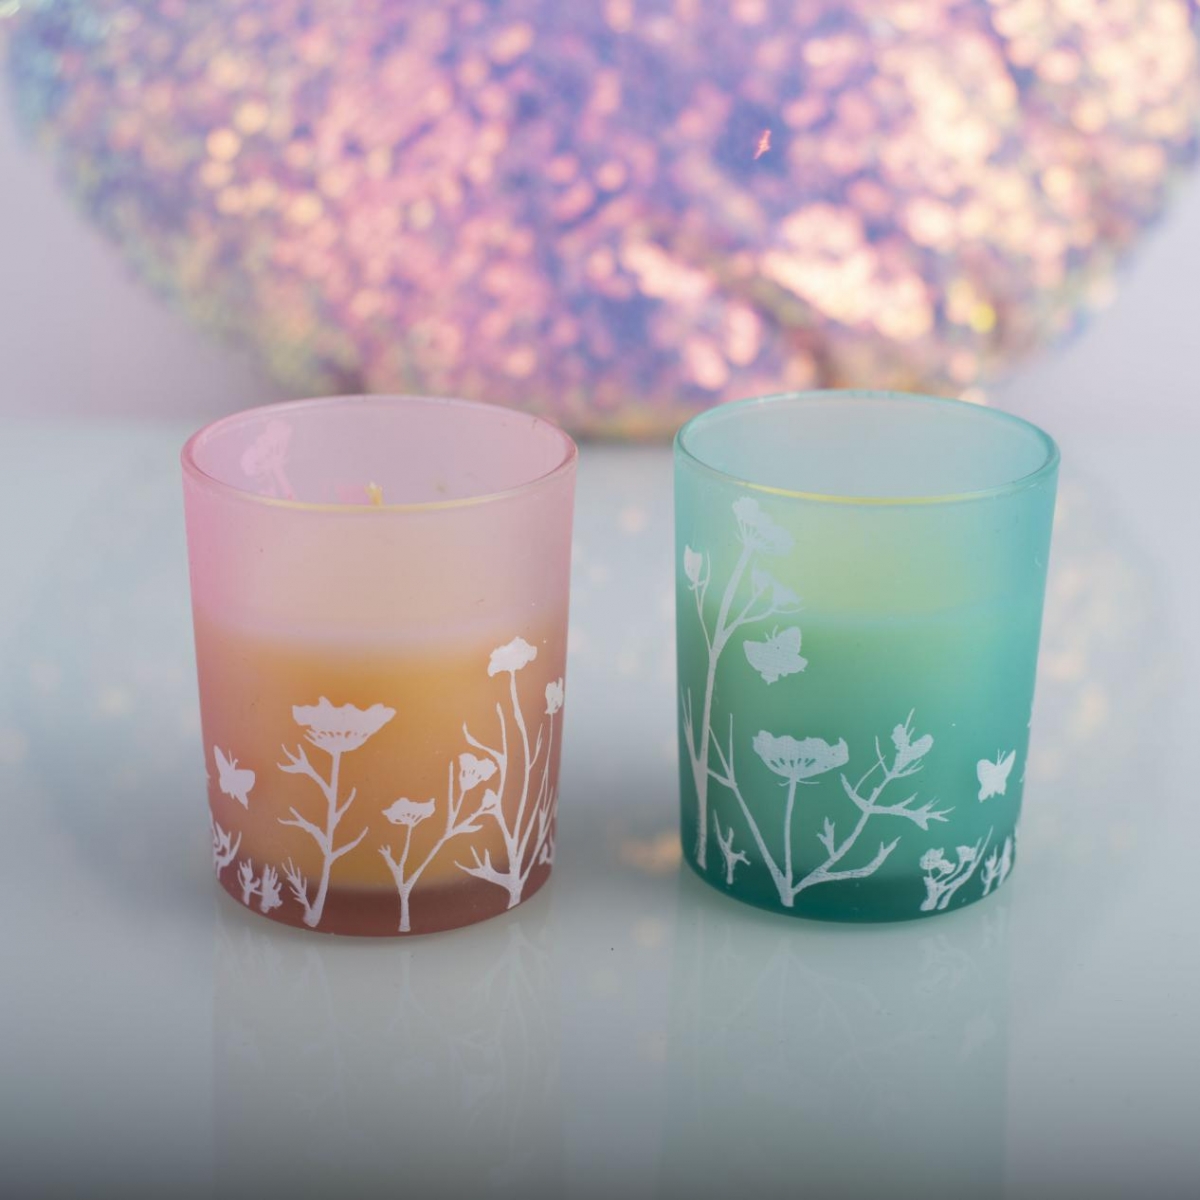 Scented Candles ：Fresh Cut Grass , Flower Printing , Vegan Candles ,China Factory , Cheapest Price-HOWCANDLE-Candles,Scented Candles,Aromatherapy Candles,Soy Candles,Vegan Candles,Jar Candles,Pillar Candles,Candle Gift Sets,Essential Oils,Reed Diffuser,Candle Holder,